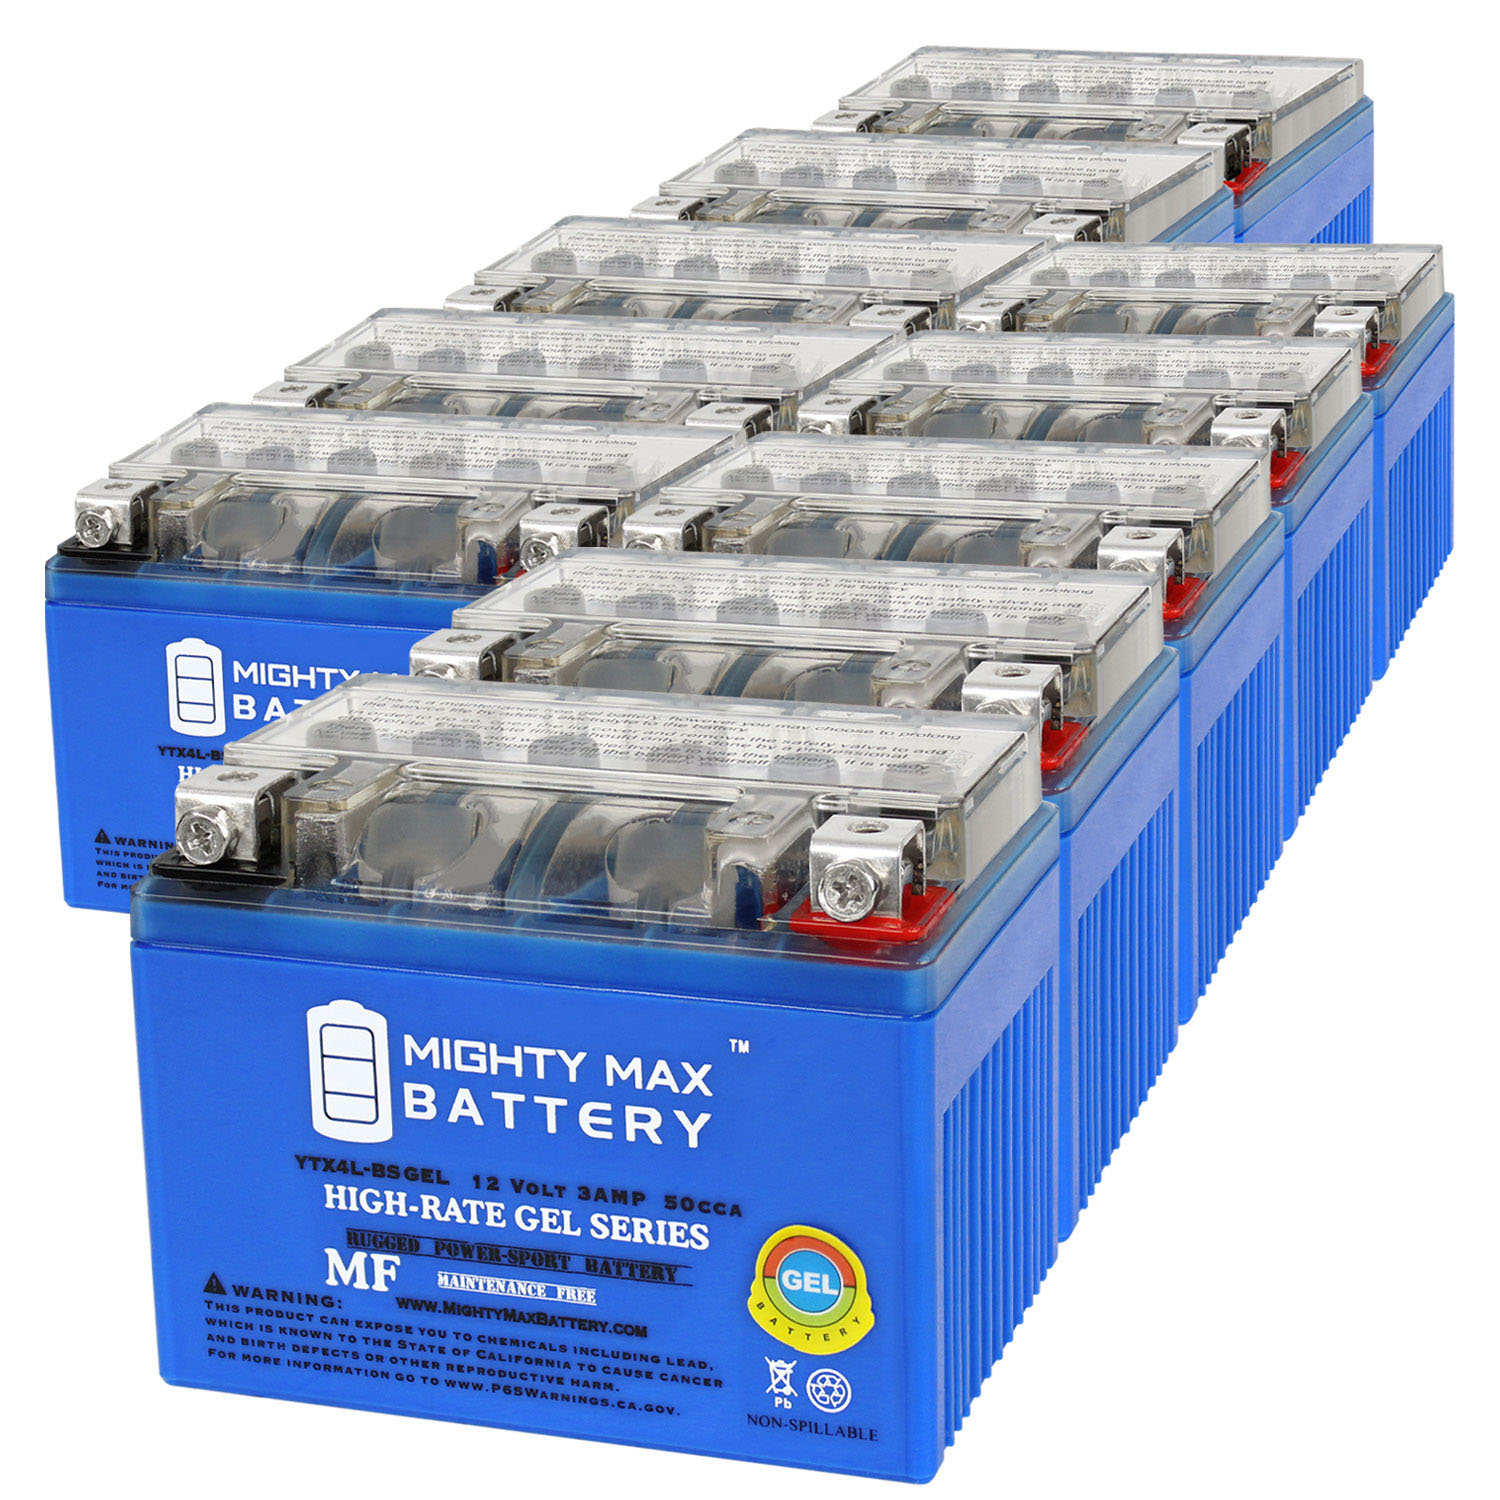 YTX4L-BSGEL 12V 3AH GEL Replacement Battery compatible with Bombardier Can-Am Quest 650 - 10 Pack